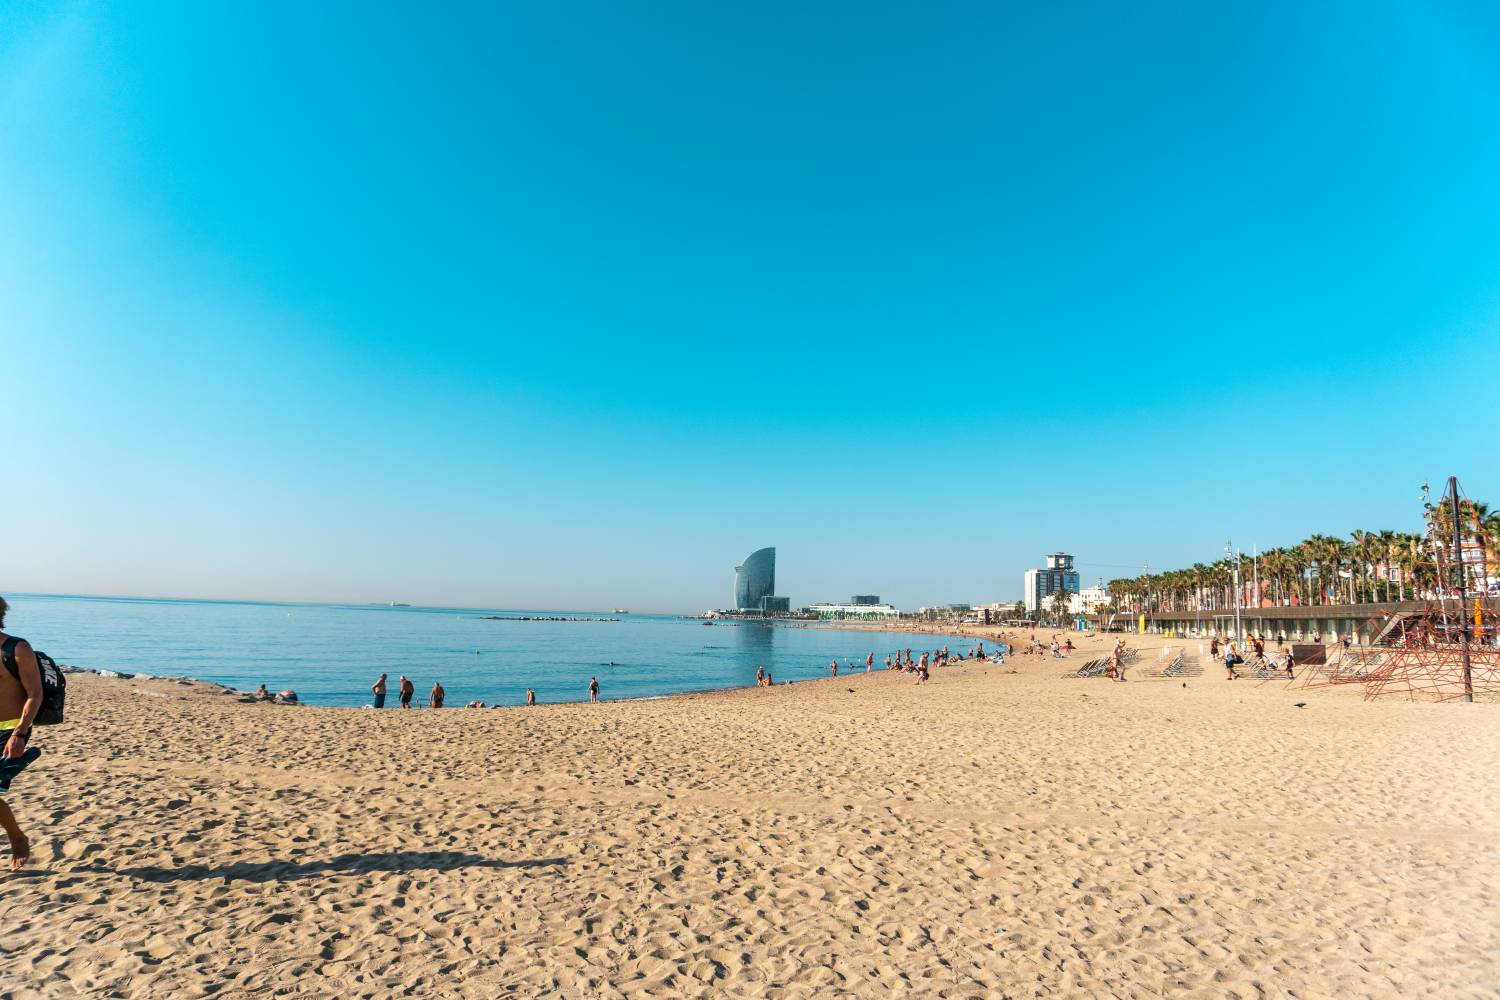 How To See The Best Of Barcelona In 3 Days - La Barceloneta Beach